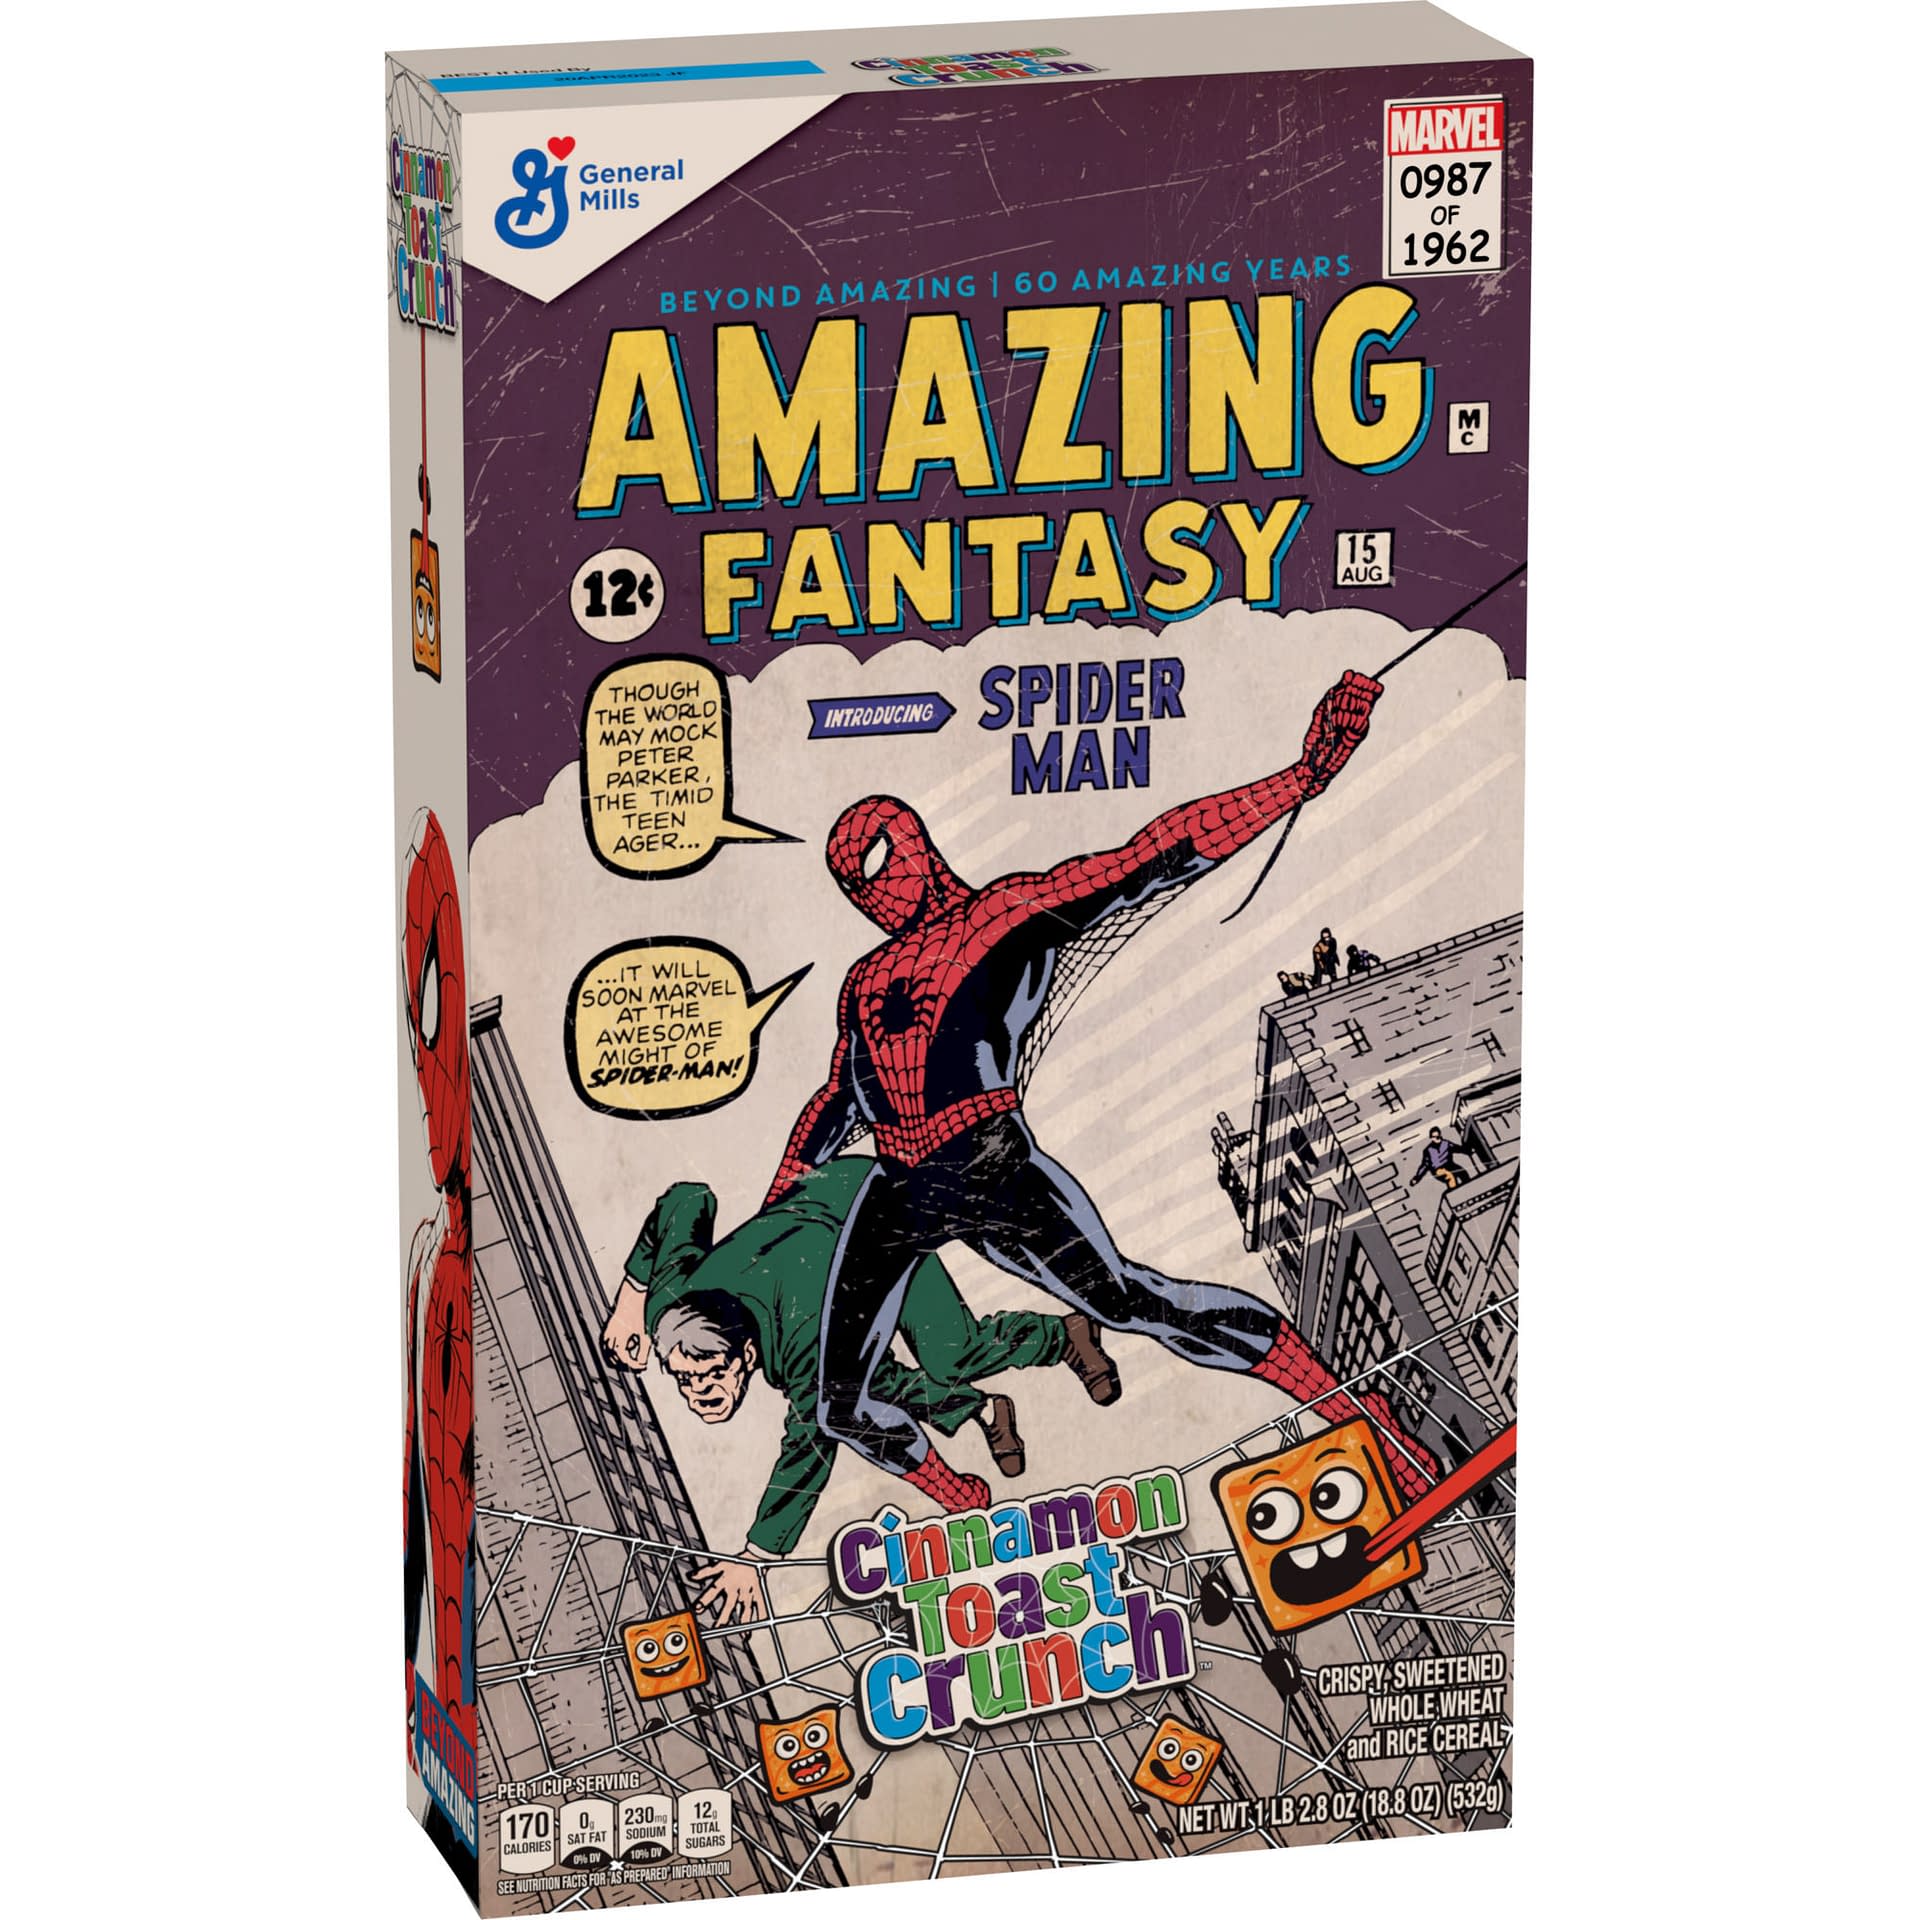 Limited Edition Spider-Man x Cinnamon Toast Crunch Boxes Swing On In